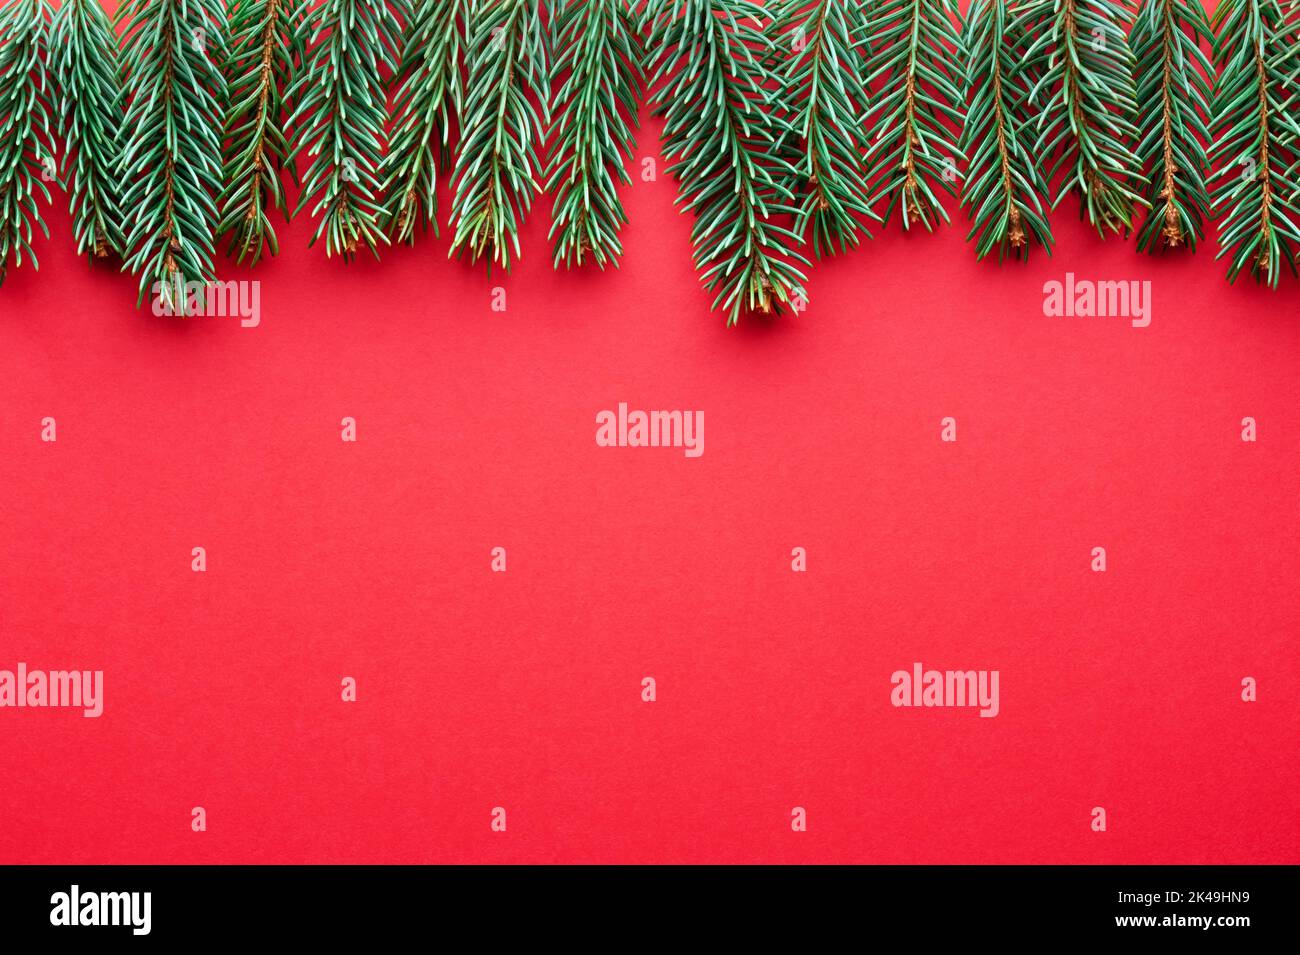 Creative Christmas holidays background with fir twigs on red cardboard paper background. Flat lay, top view, copy space Stock Photo